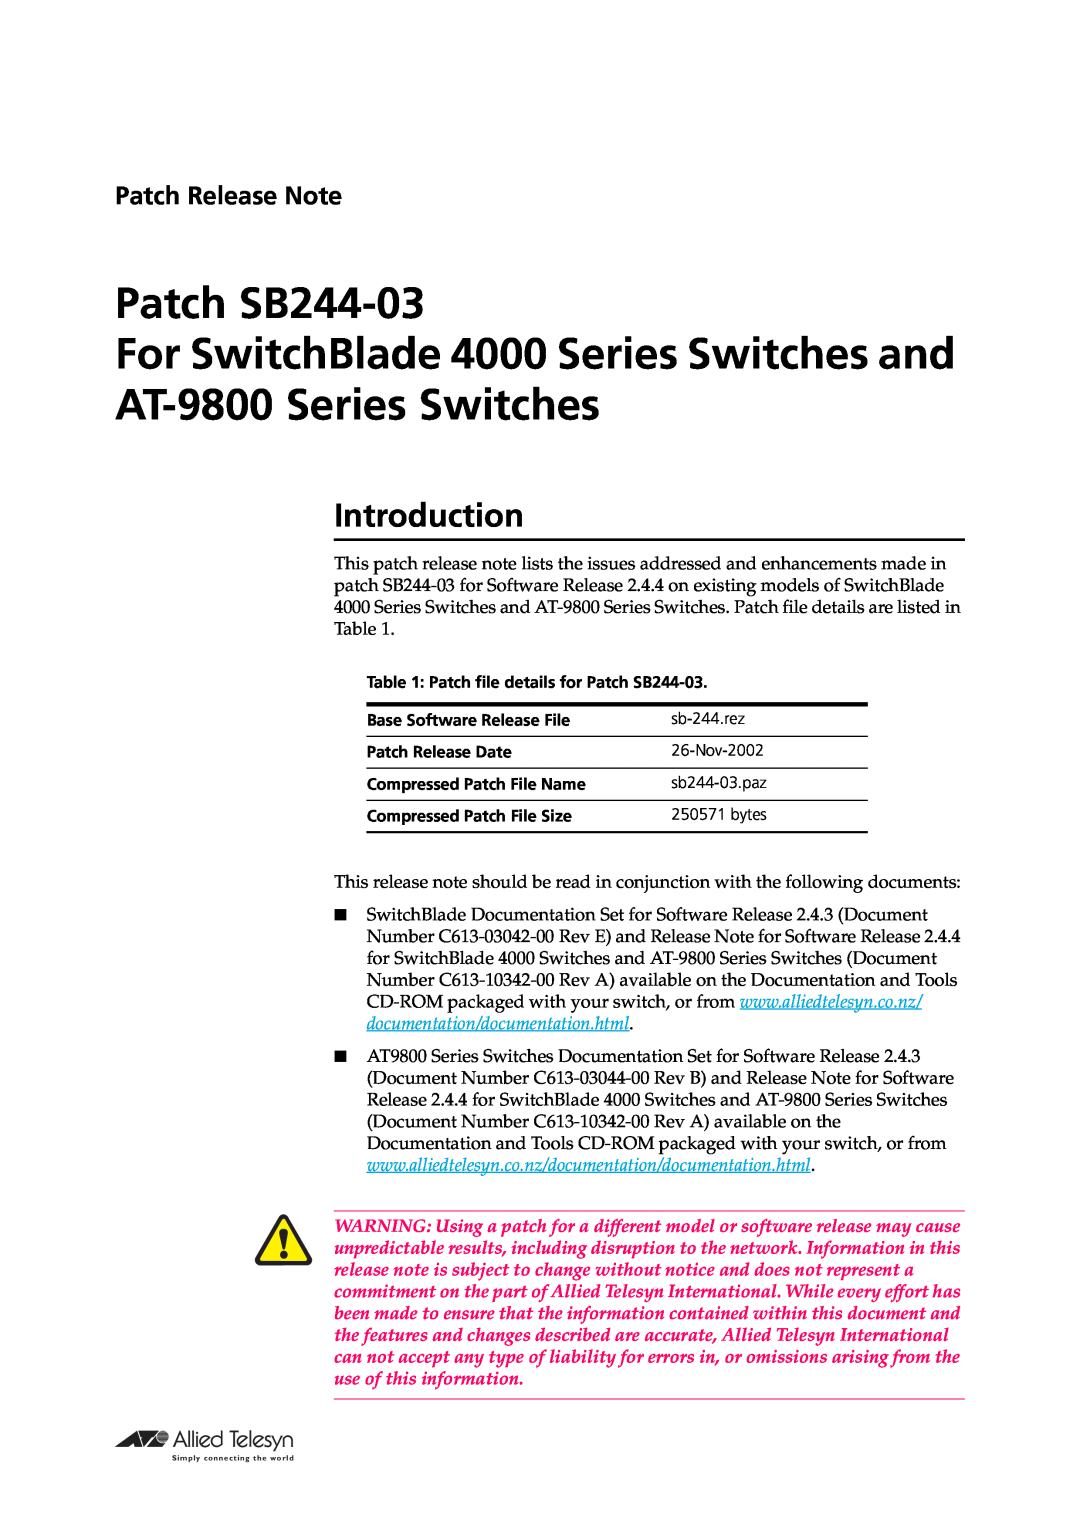 Allied Telesis manual Introduction, Patch SB244-03 For SwitchBlade 4000 Series Switches and, AT-9800 Series Switches 